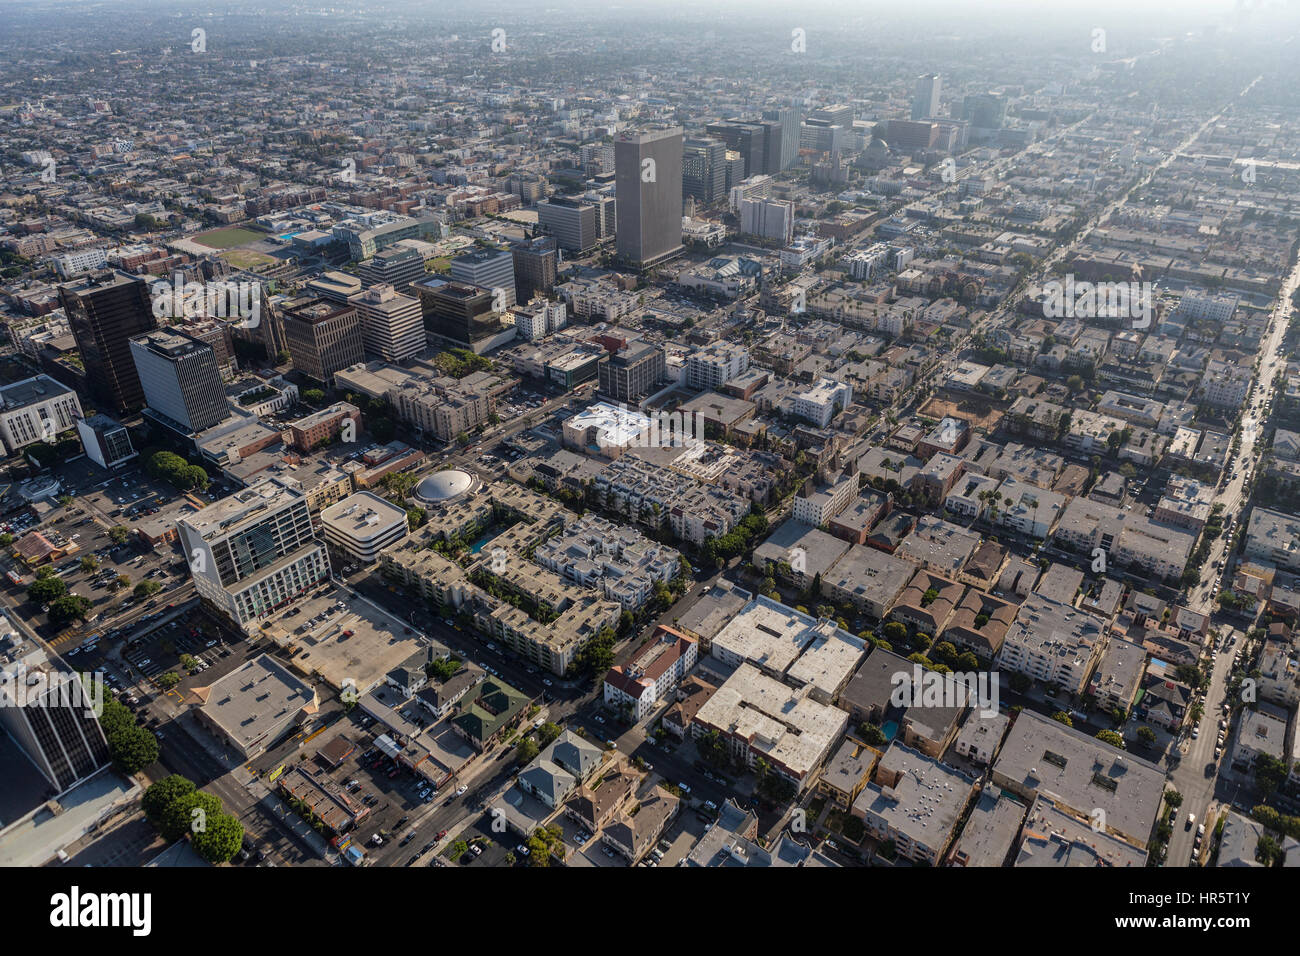 Los Angeles, California, USA - August 6, 2016:  Aerial view of summer afternoon smog over the Mid Wilshire and Korea Town neighborhoods. Stock Photo